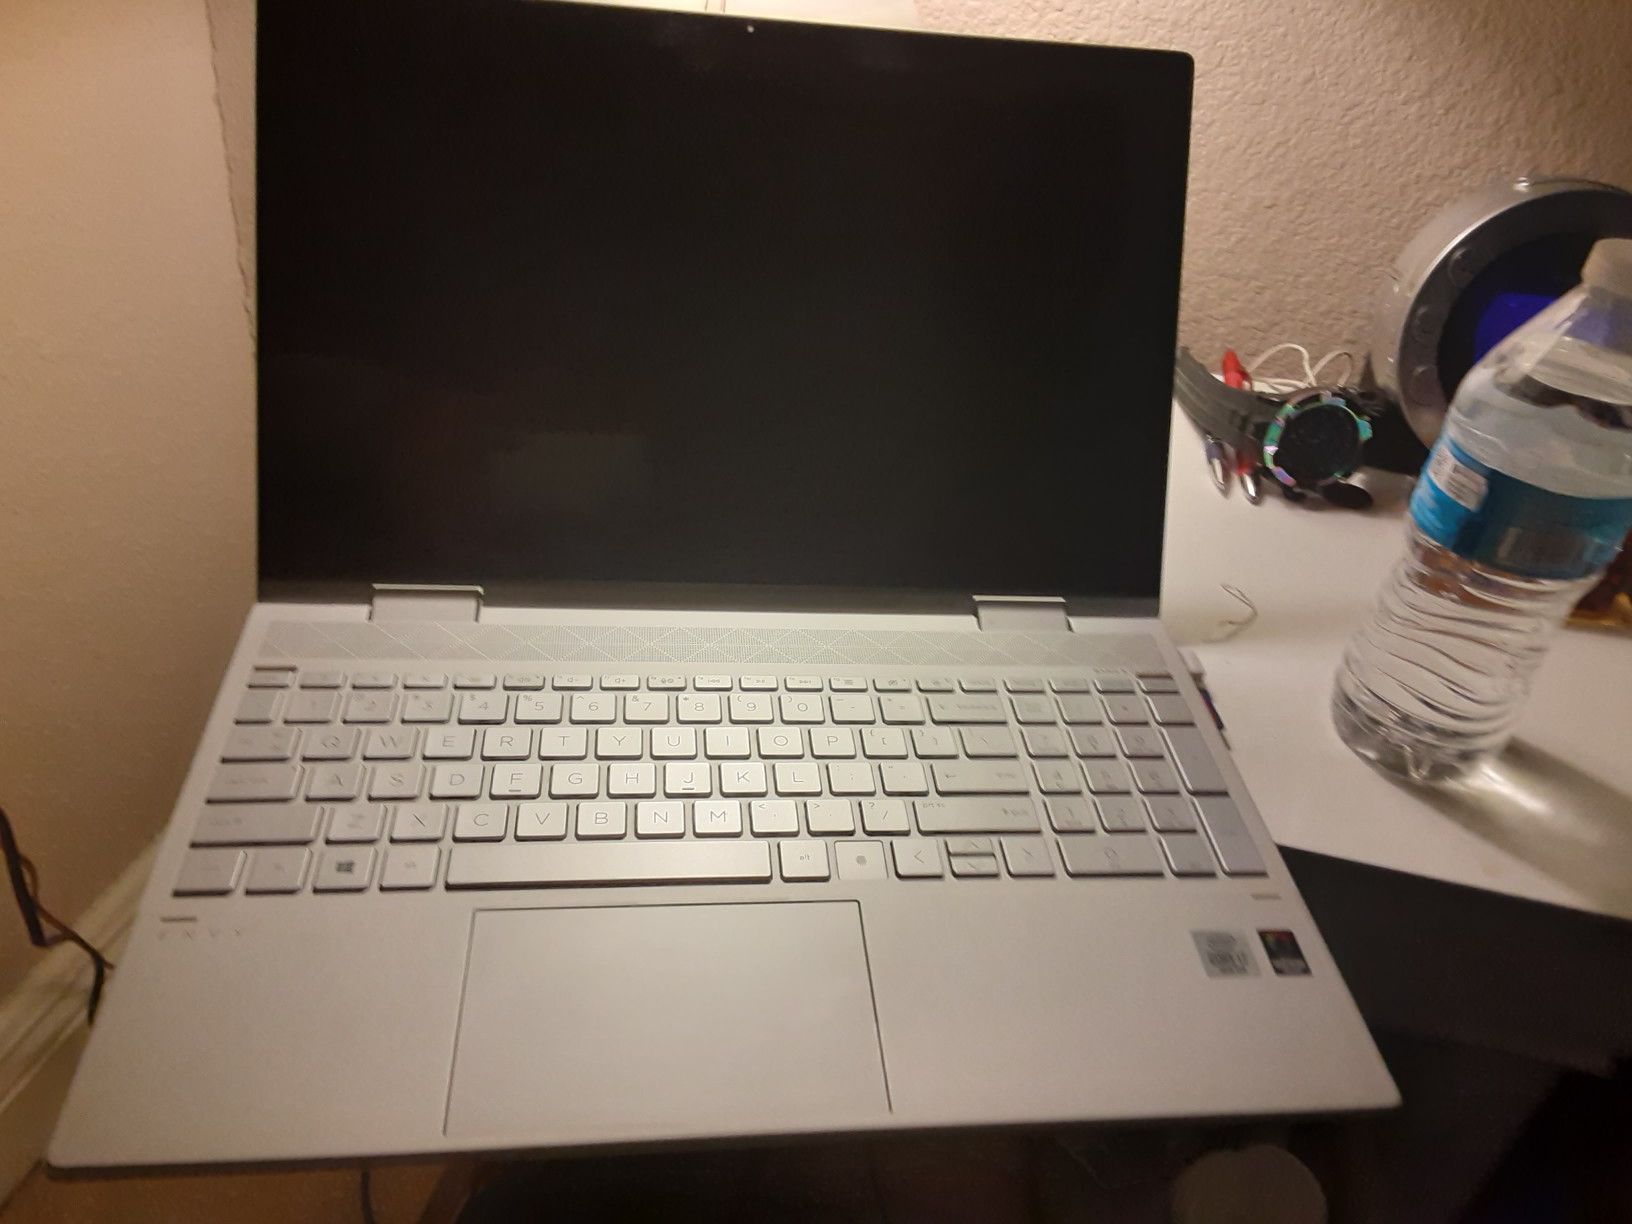 i got a labtop. Hp core 17... it cost 1649 ... Im selling it 500. i need the money